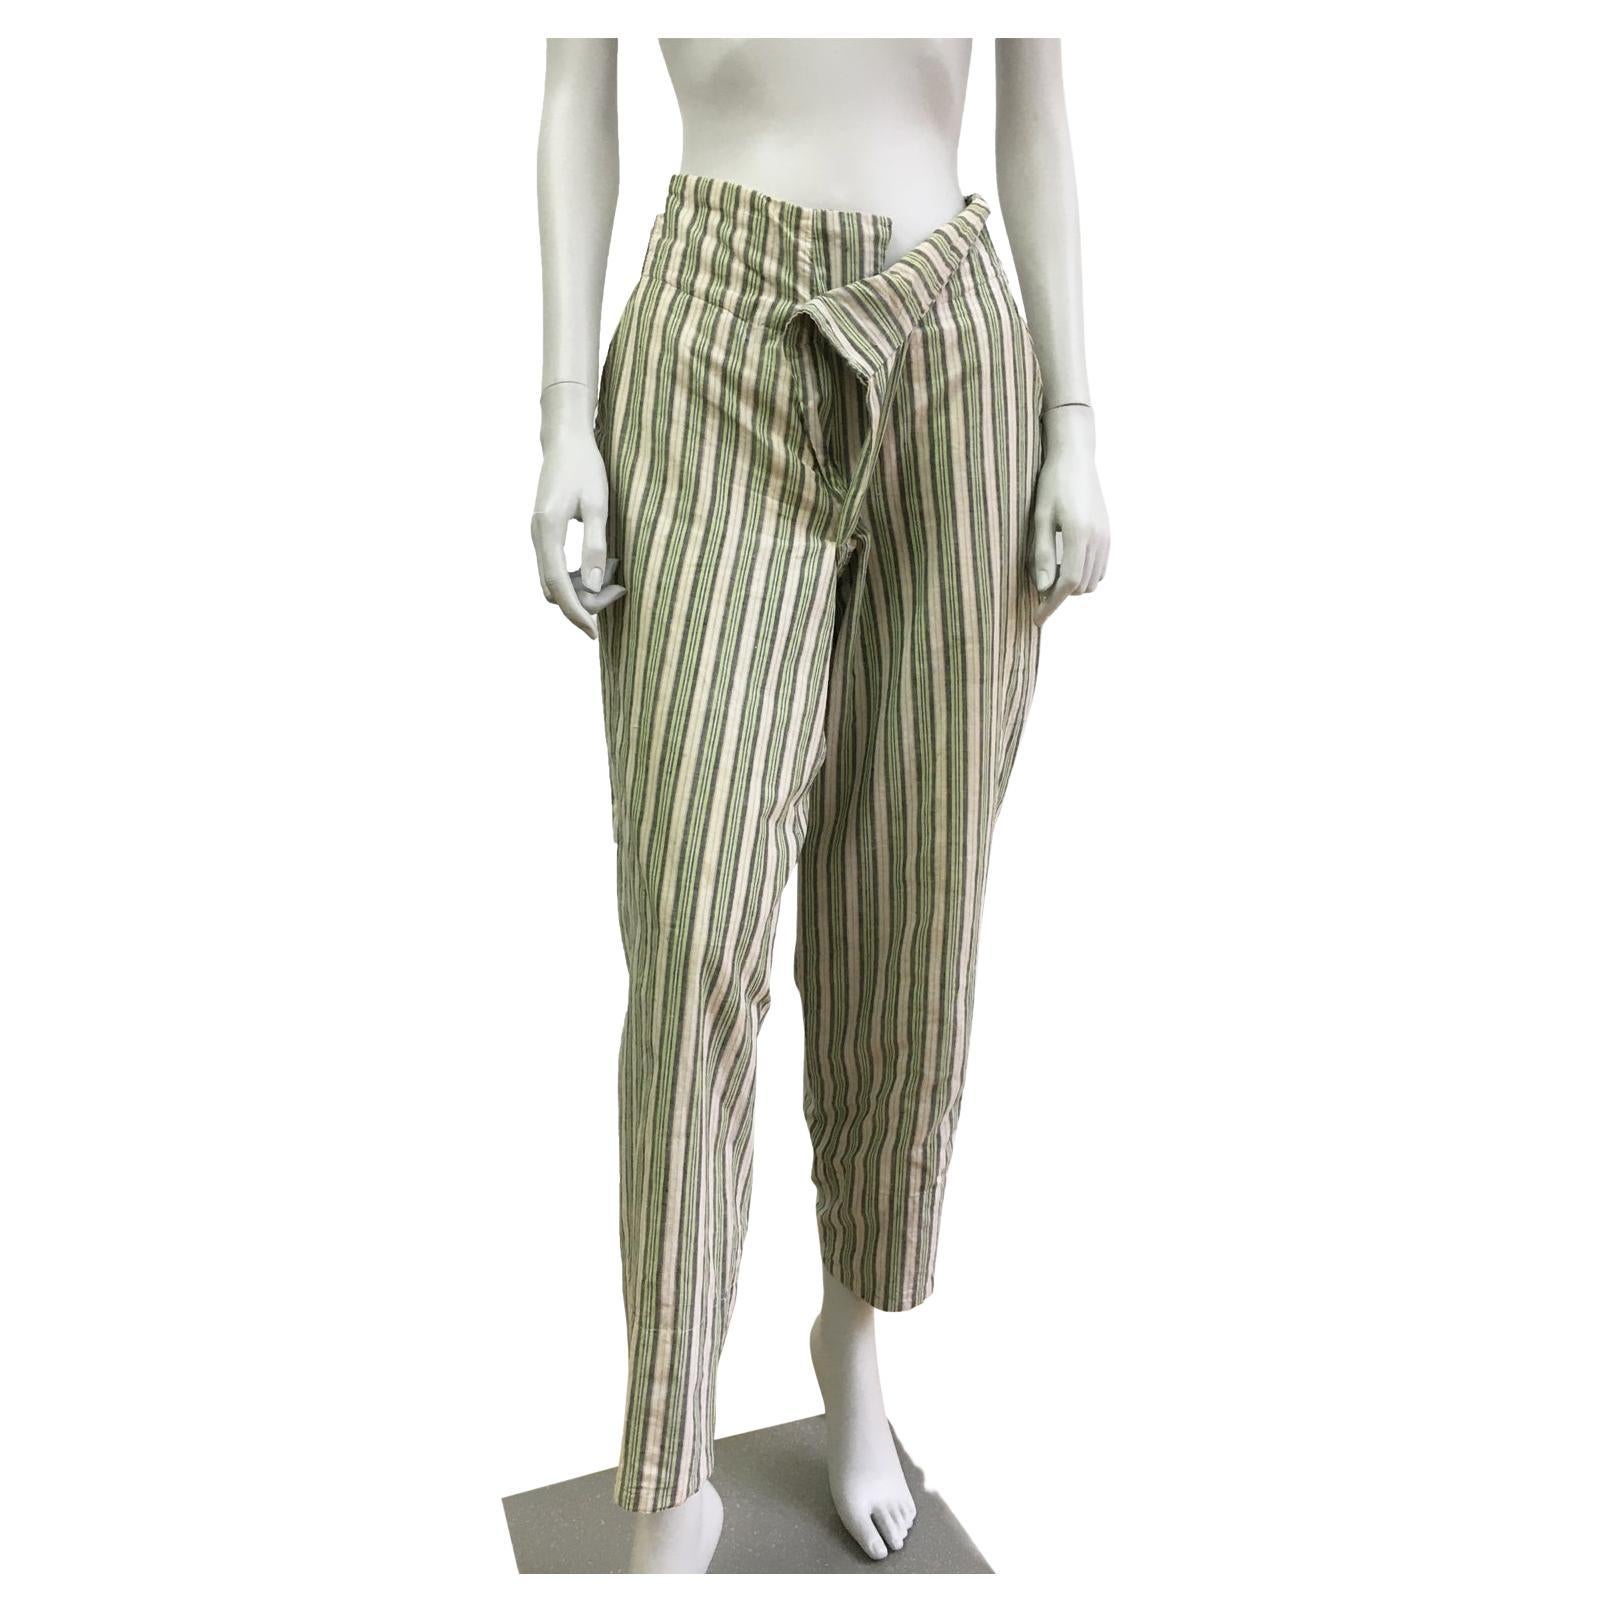 WORLDS END Vivienne Westwood And Malcom Mclaren Pirate Pants Trouser For Sale